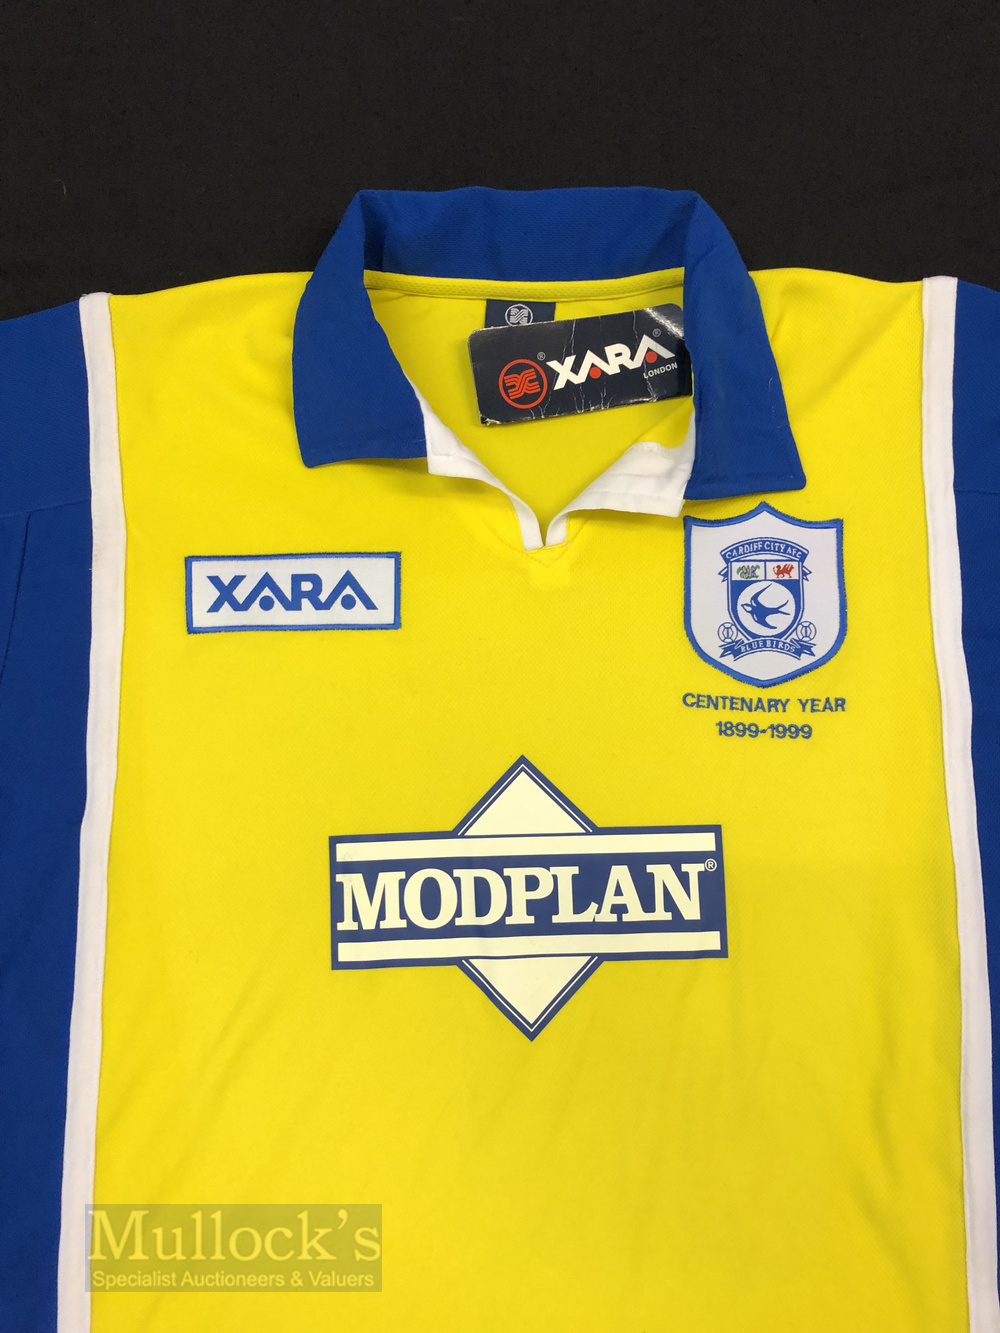 1999 Cardiff City Away football shirt size large, in yellow and blue, Xara, short sleeve - Image 2 of 2